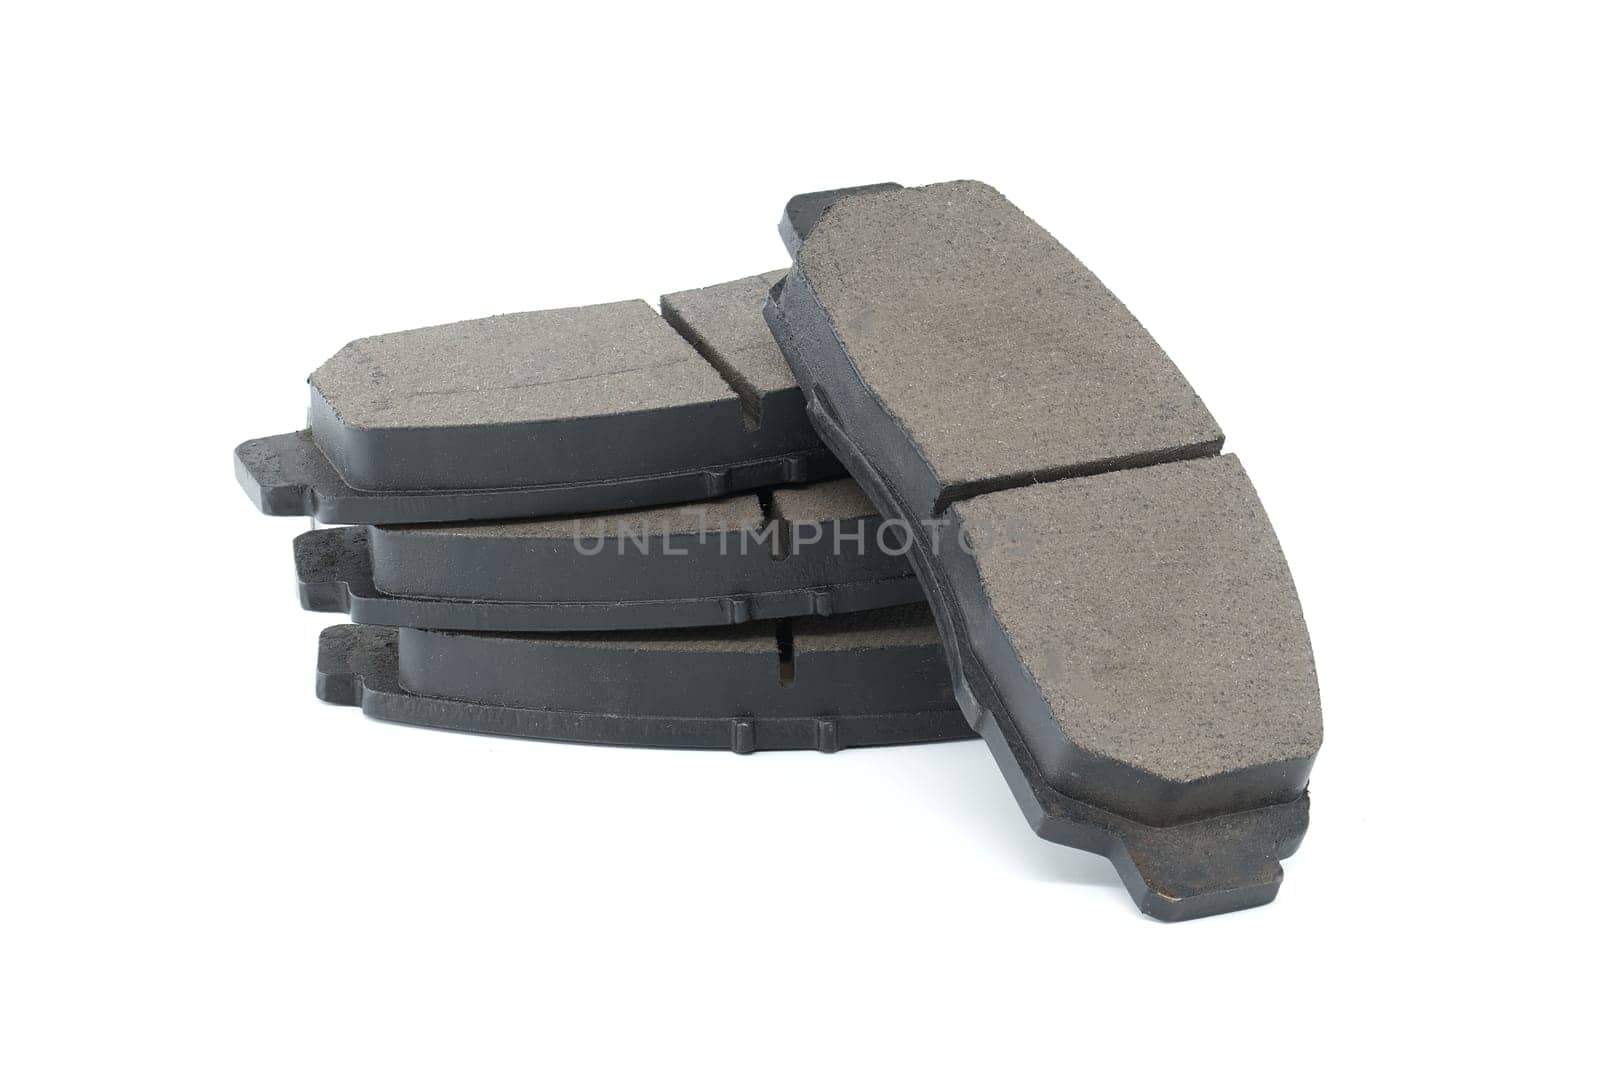 Set of auto brake pads isolated on white background, brake system maintenance, replacement parts for vehicle